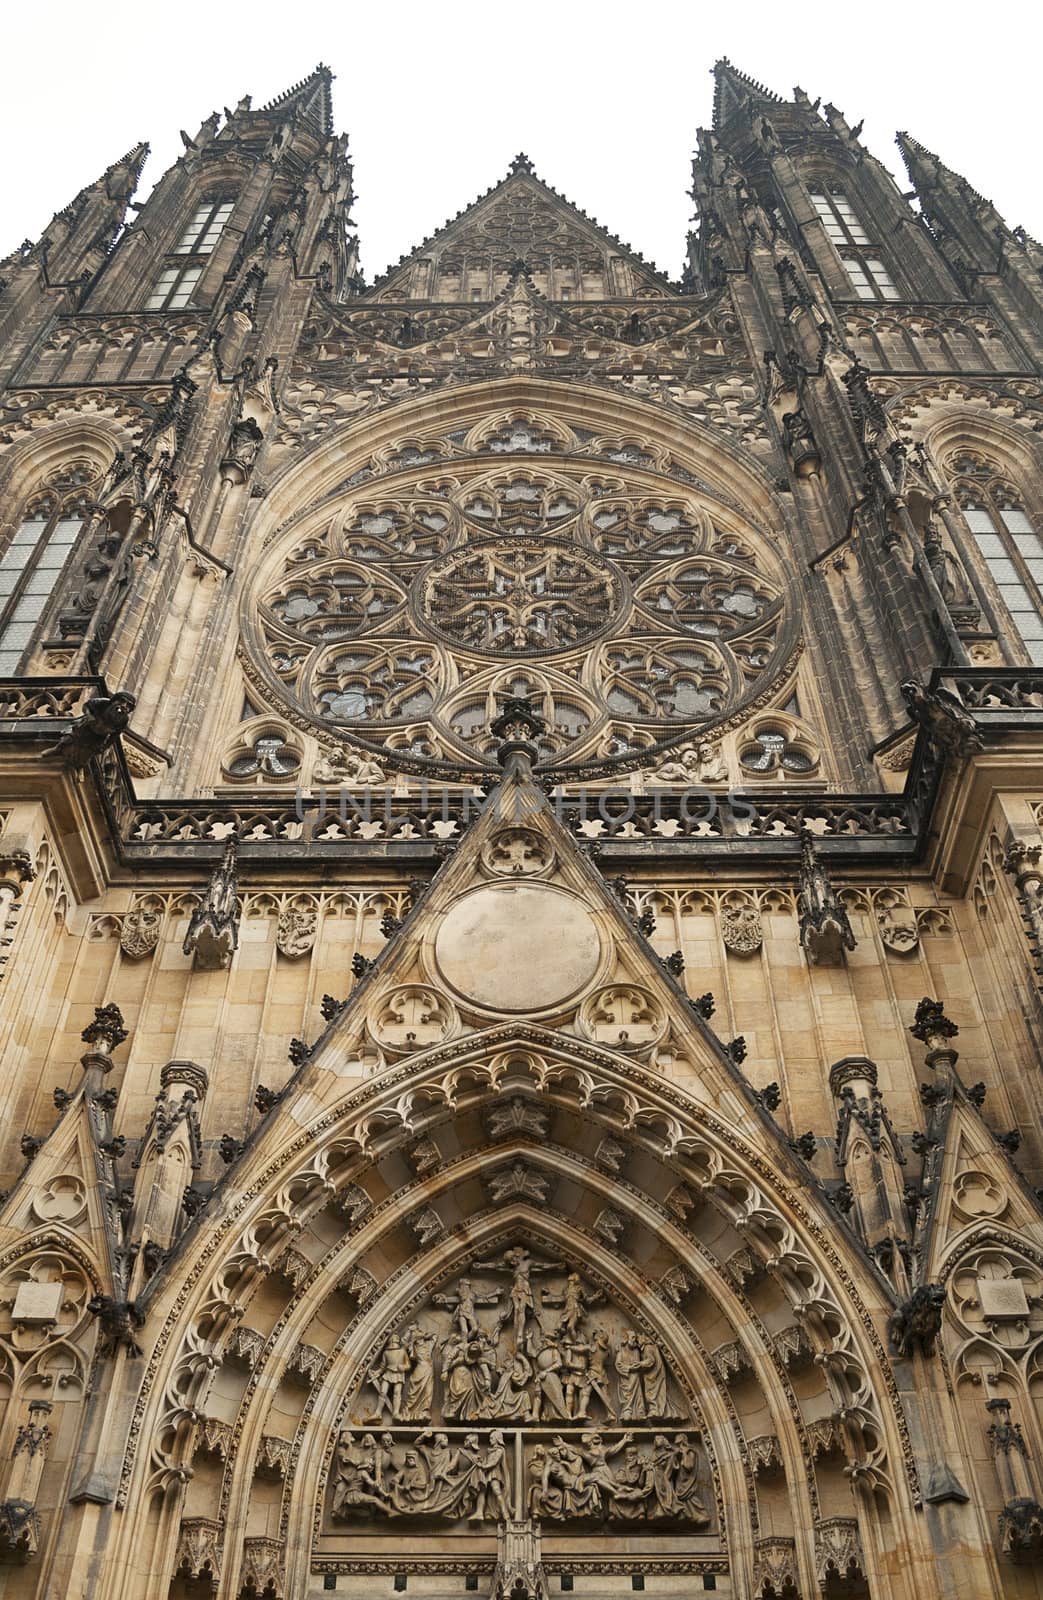 The facade of St. Vitus Cathedral in Prague with  its rose window